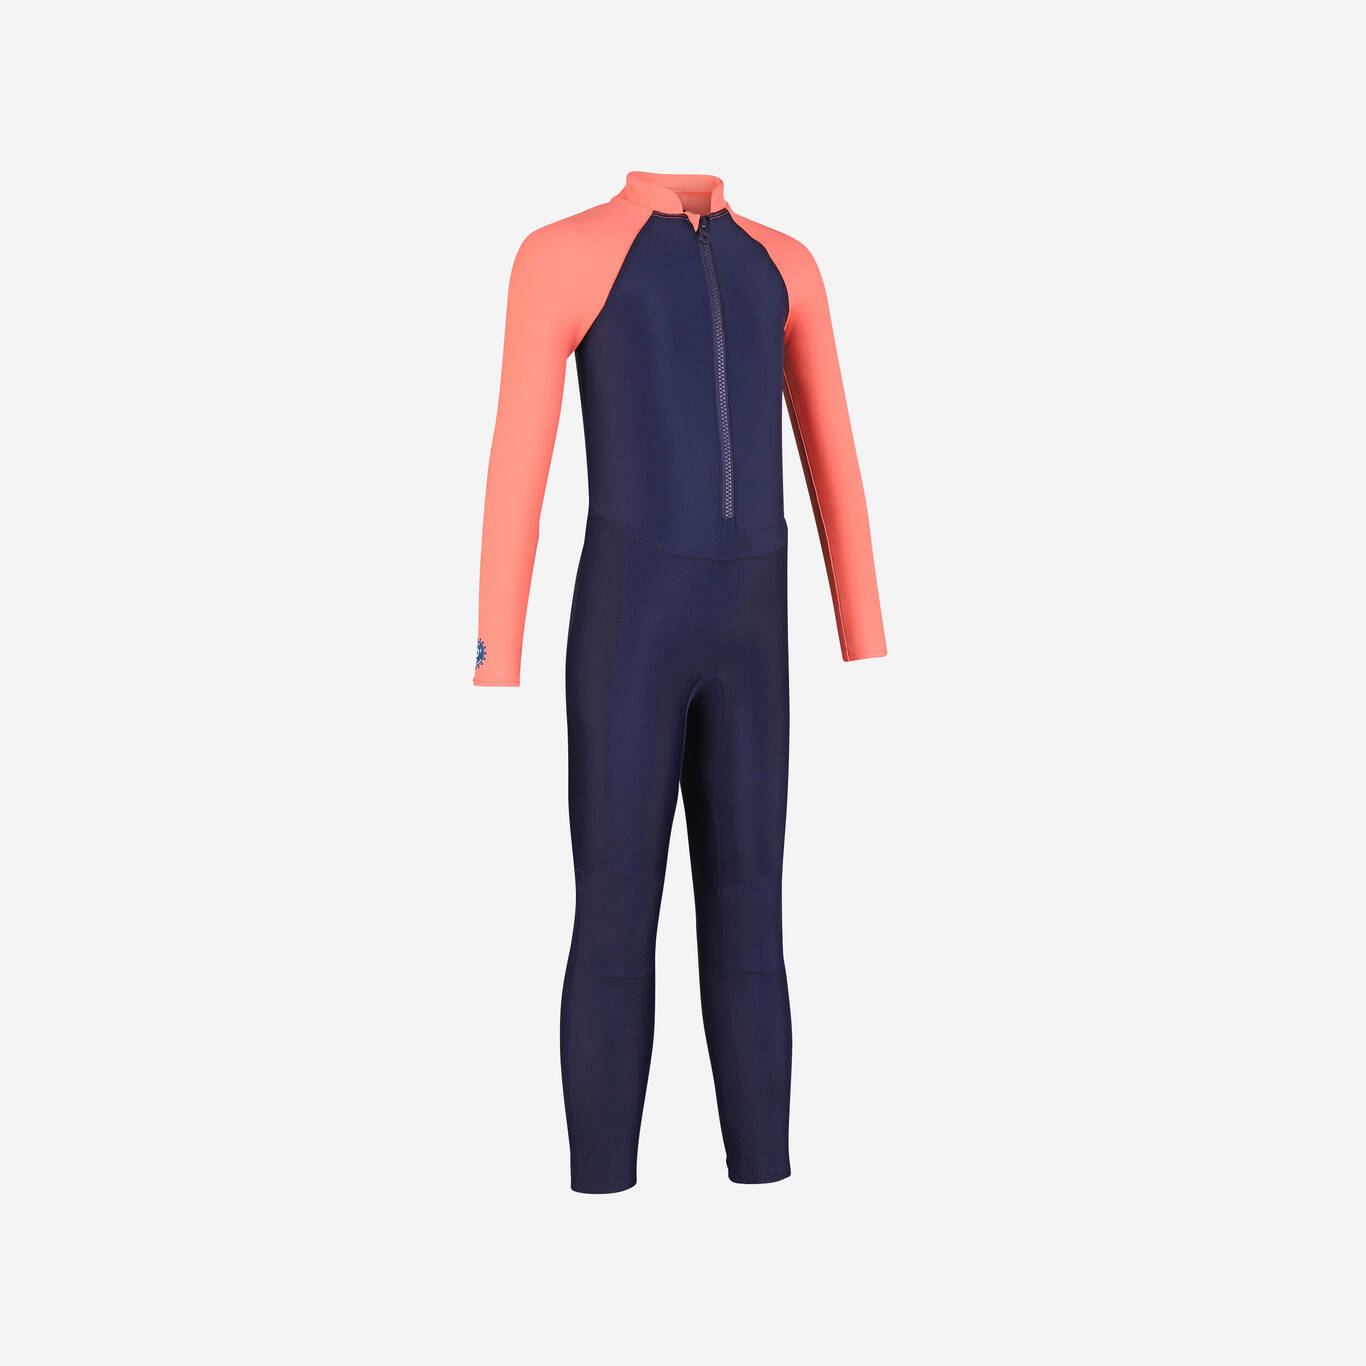 Wetsuit for Swimming combi swim coral